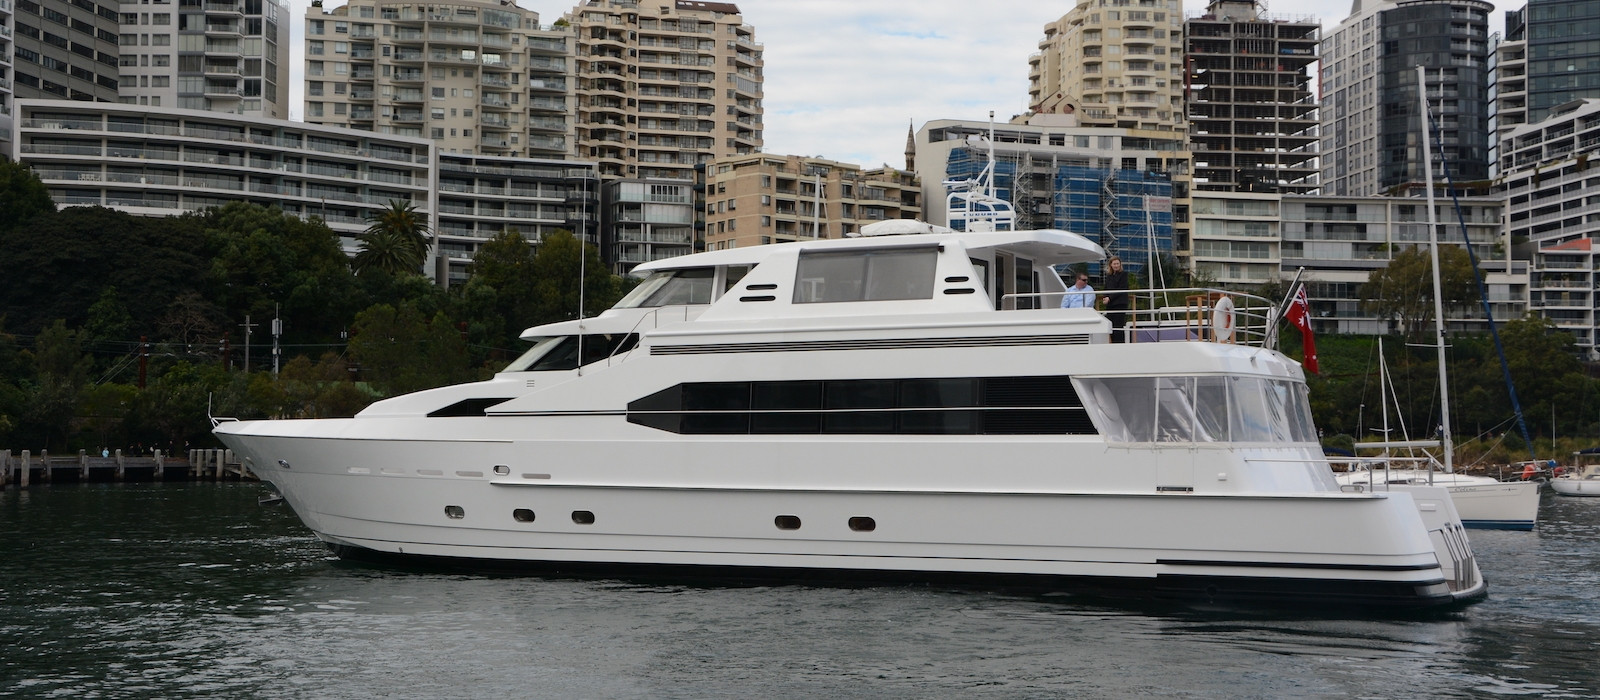 Side view of AQA super yacht hire at Lavender Bay